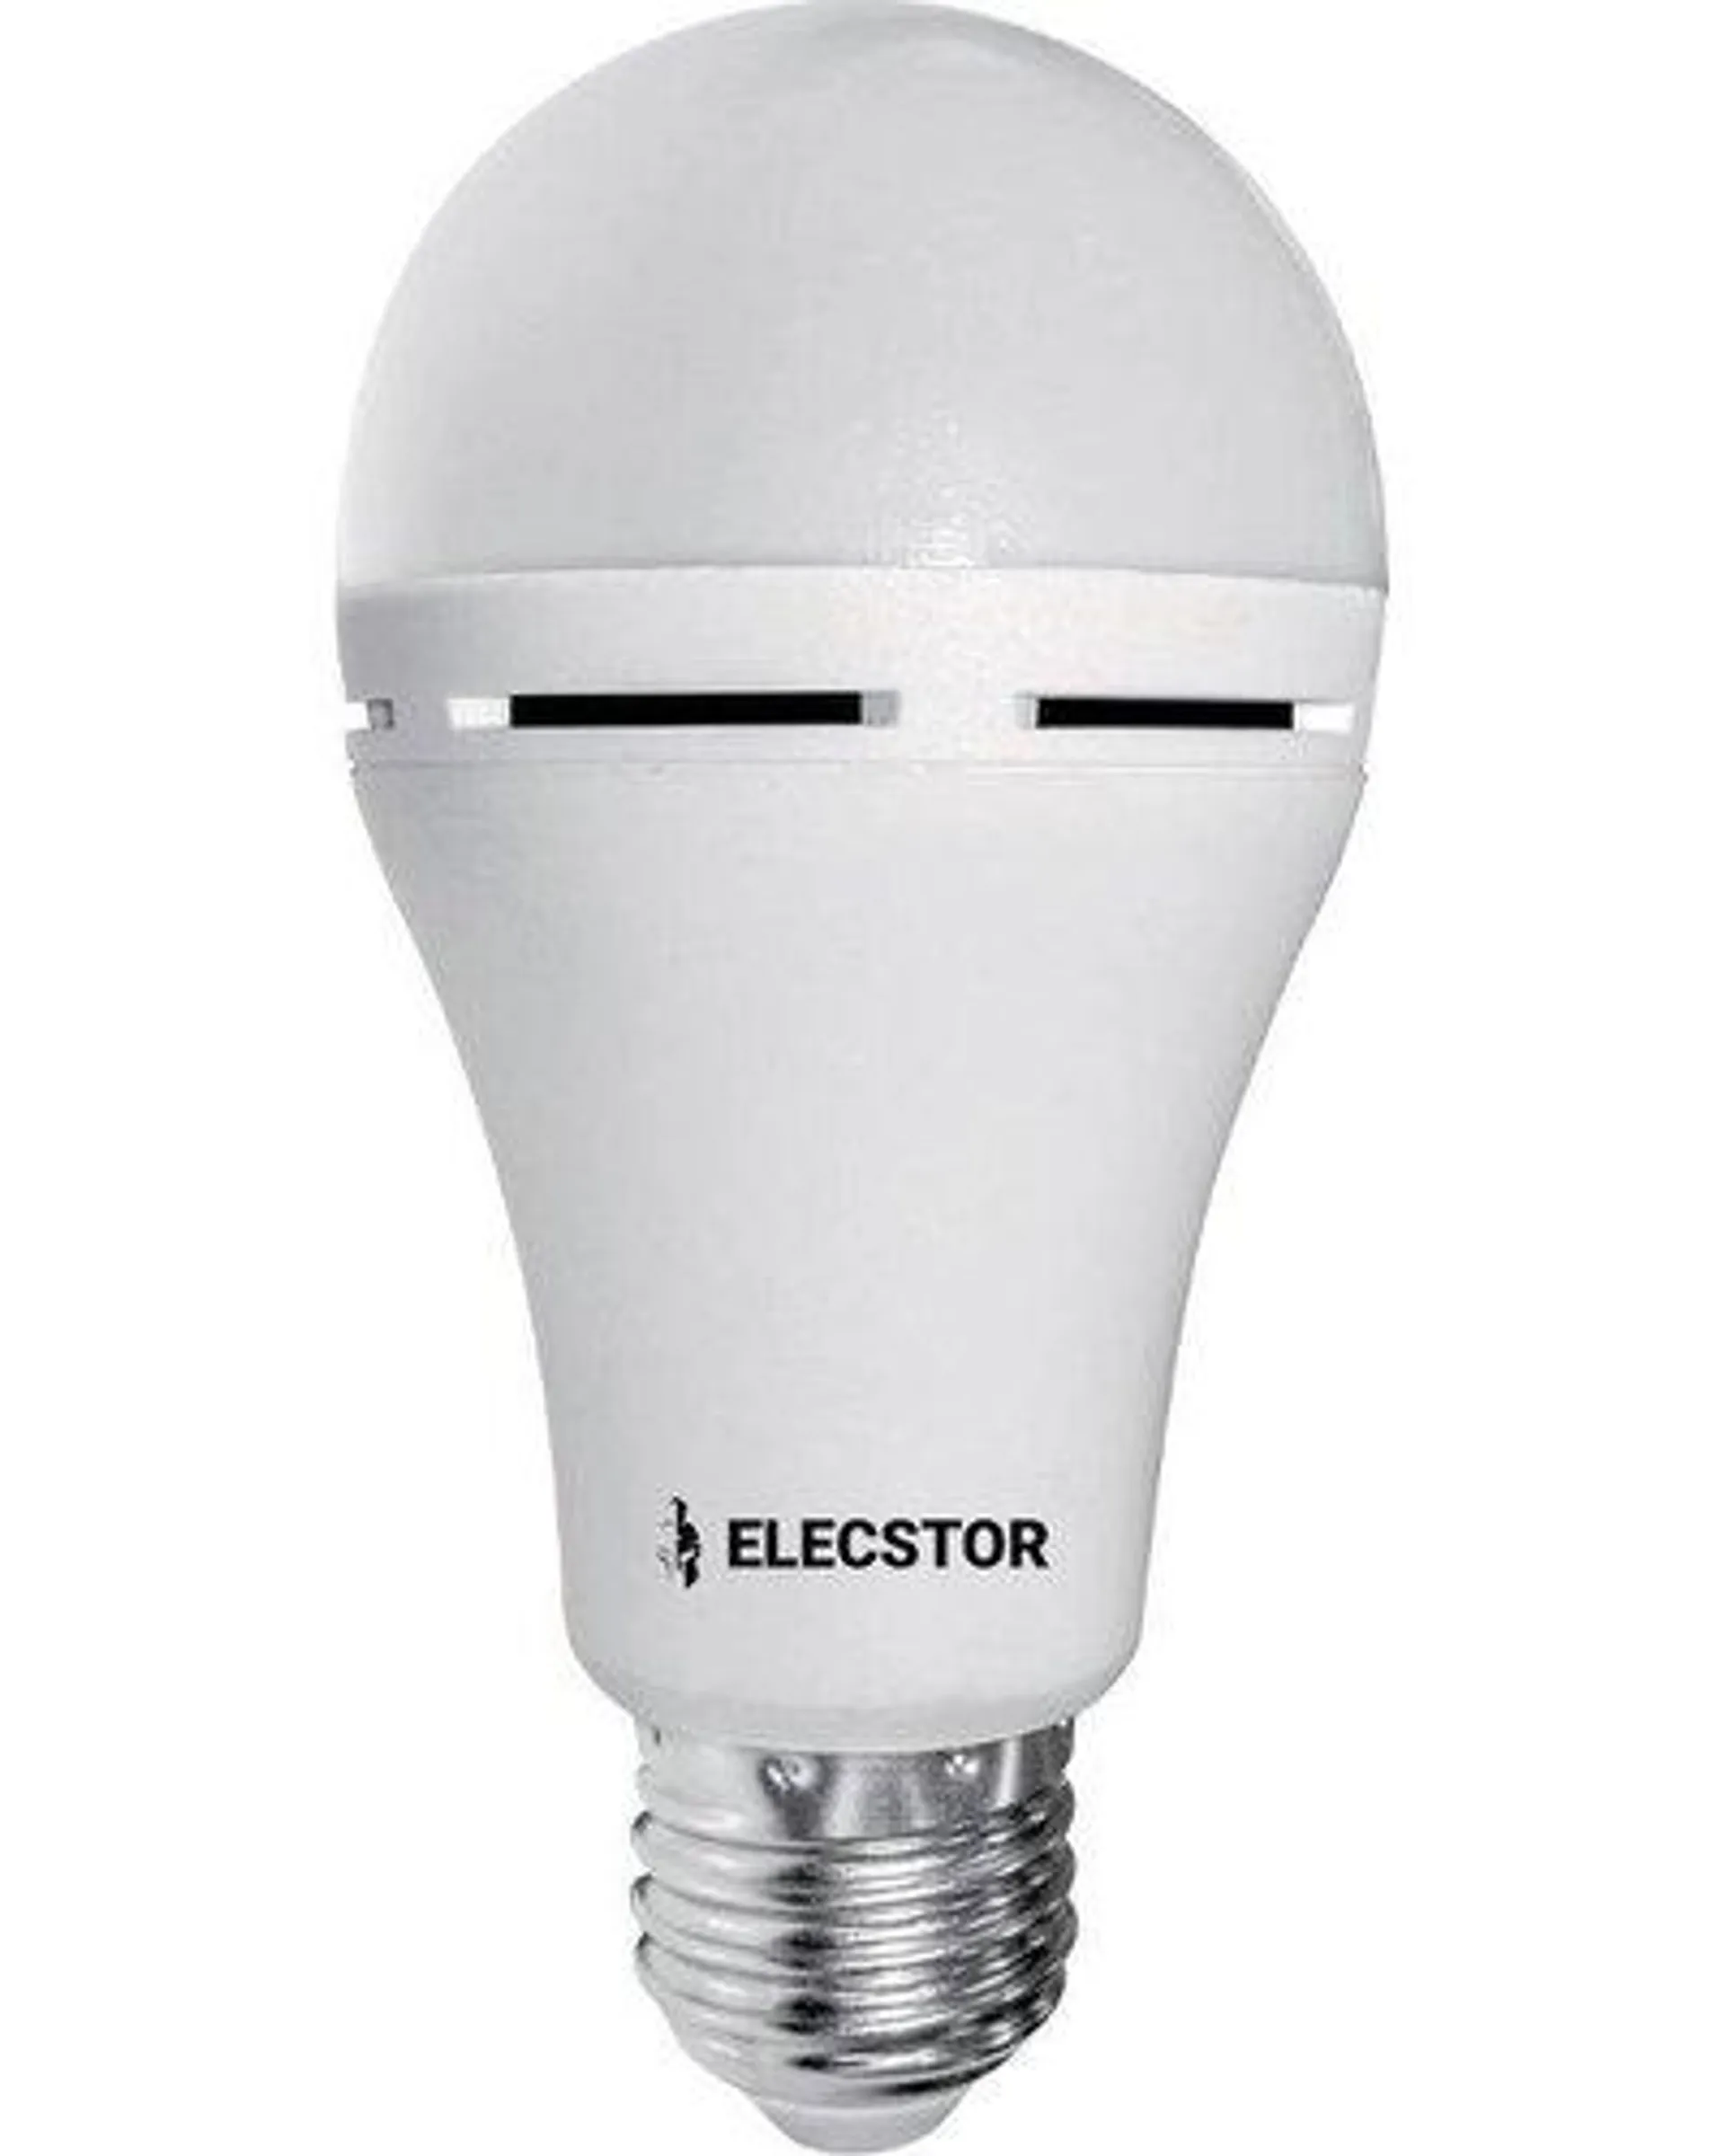 Elecstor E27 7W Rechargeable LED Bulb (Cool White)